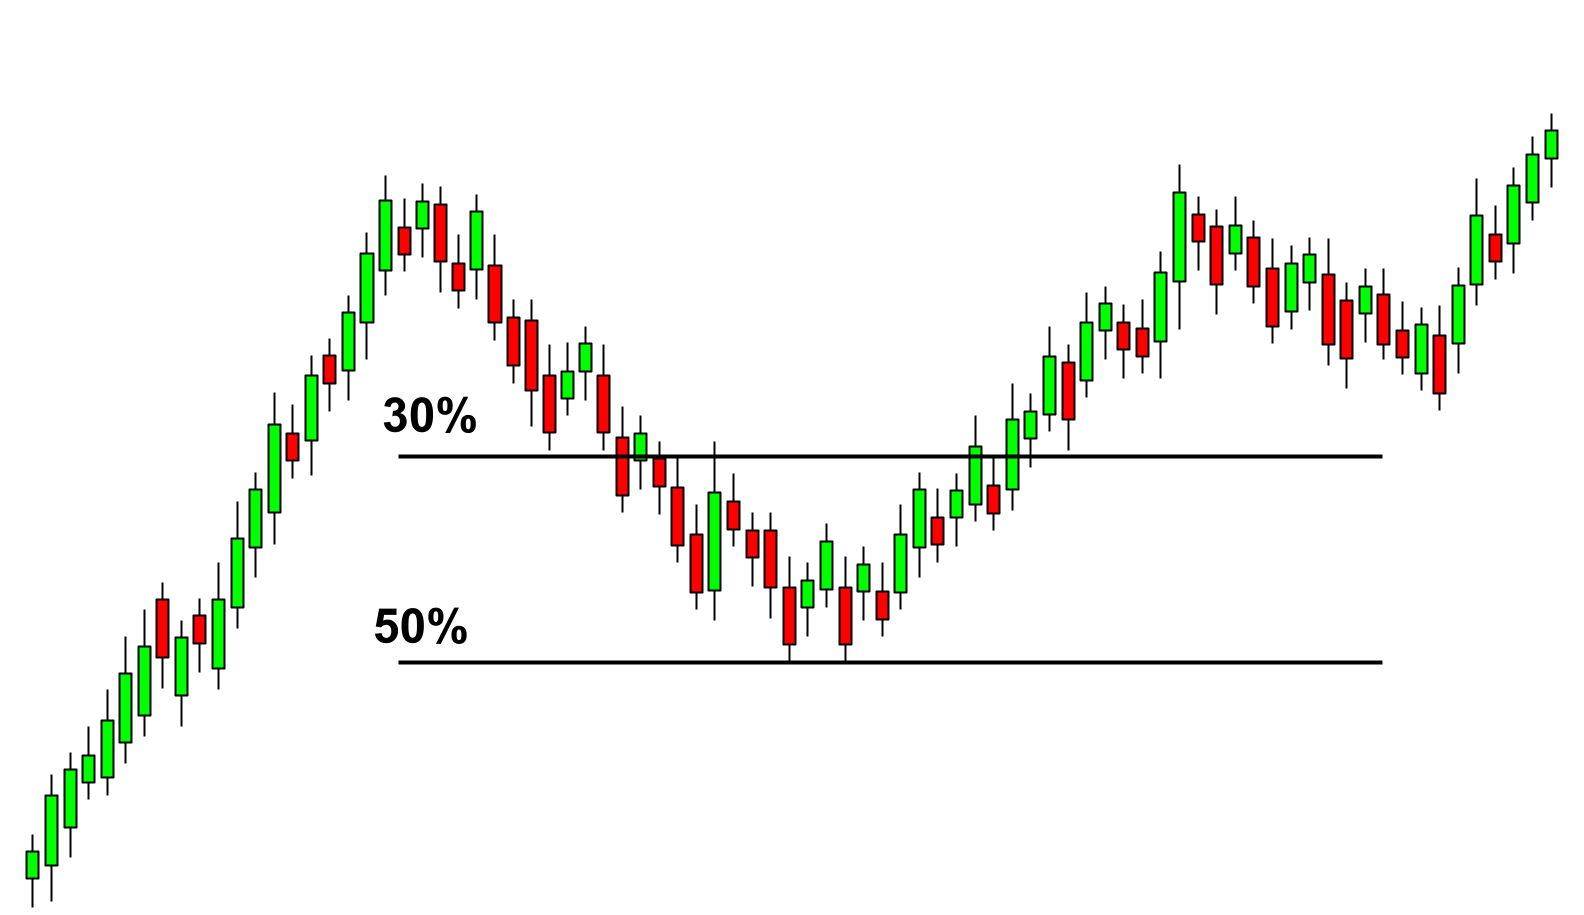 The retracement levels to spot cup and handle pattern